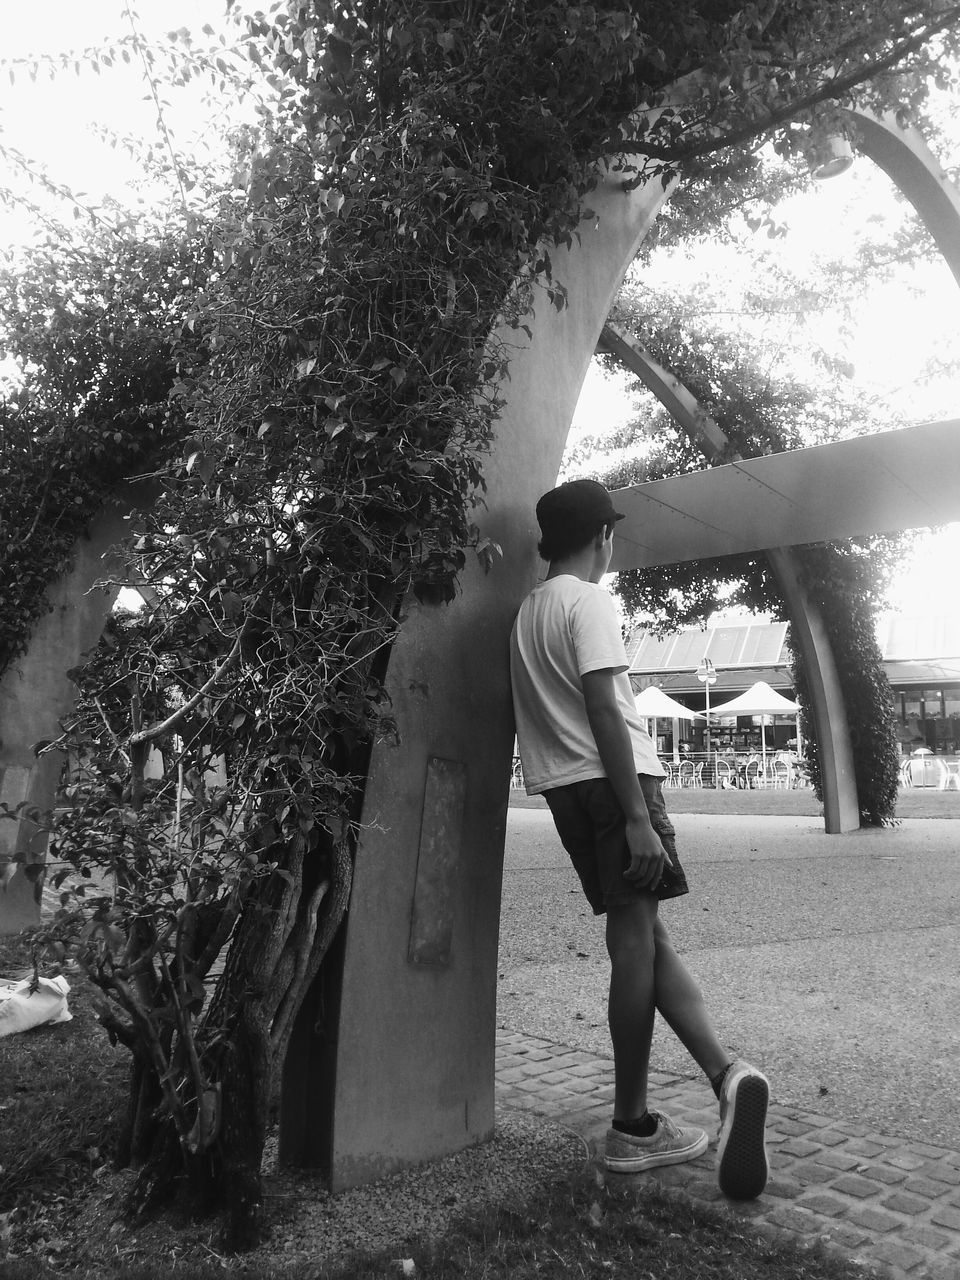 tree, lifestyles, leisure activity, full length, walking, casual clothing, rear view, person, standing, sunlight, park - man made space, childhood, day, men, outdoors, growth, street, girls